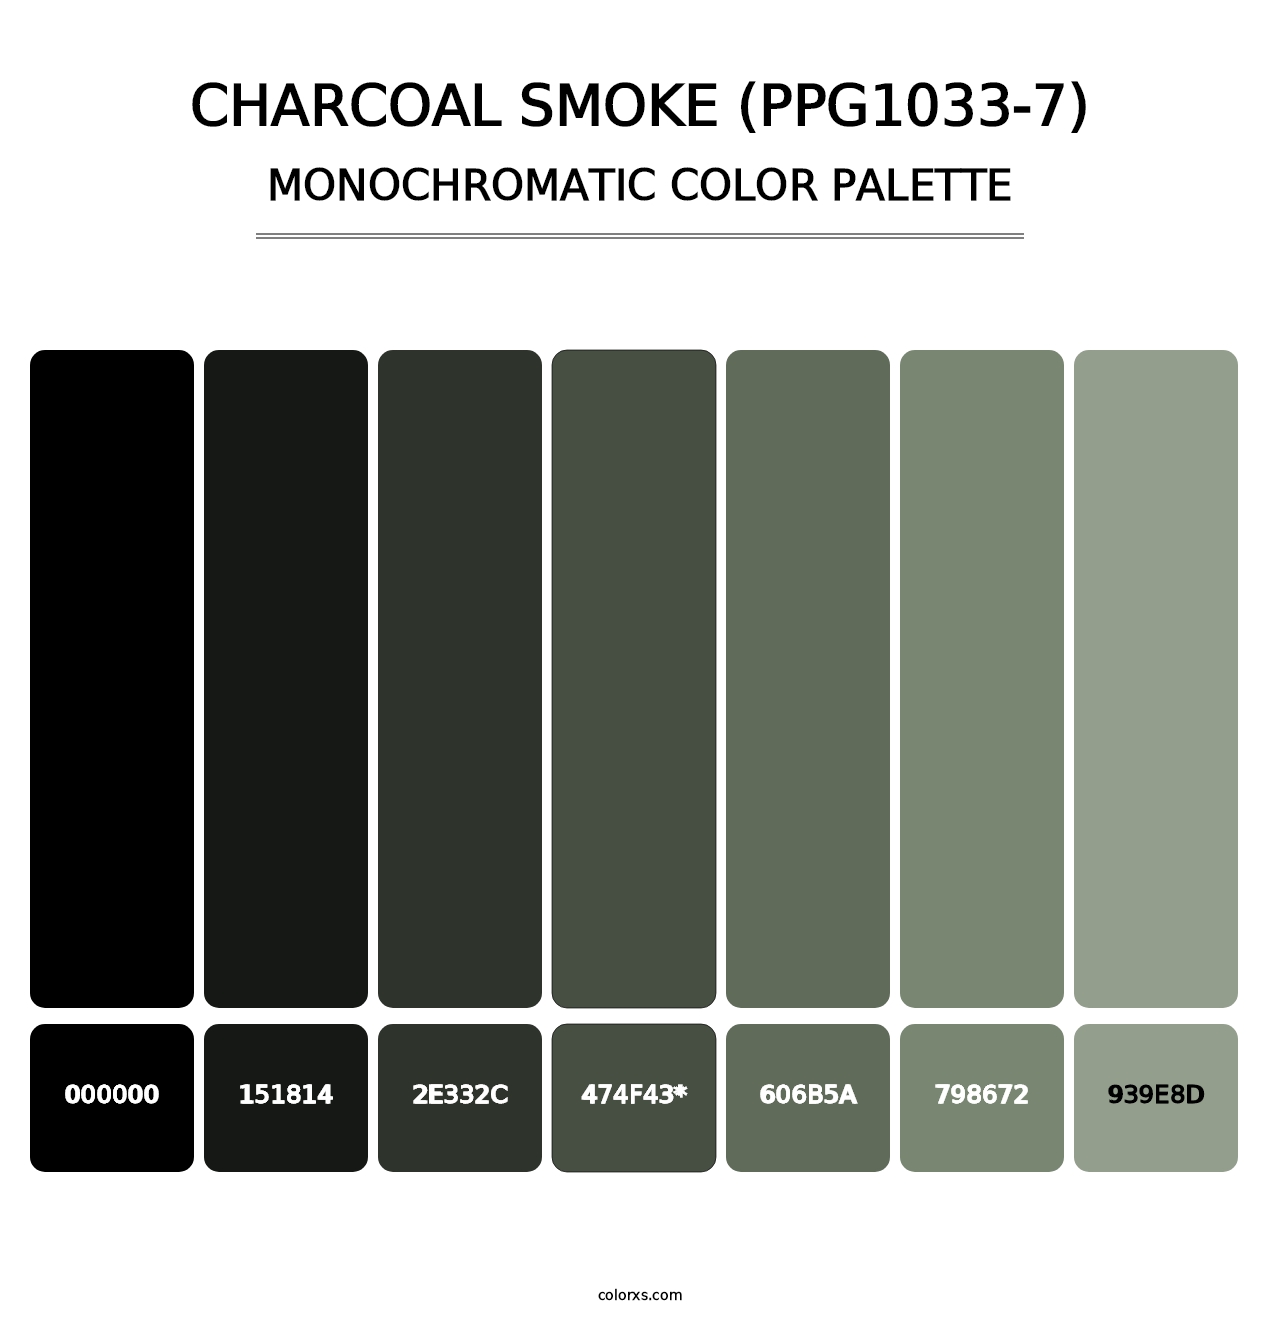 Charcoal Smoke (PPG1033-7) - Monochromatic Color Palette